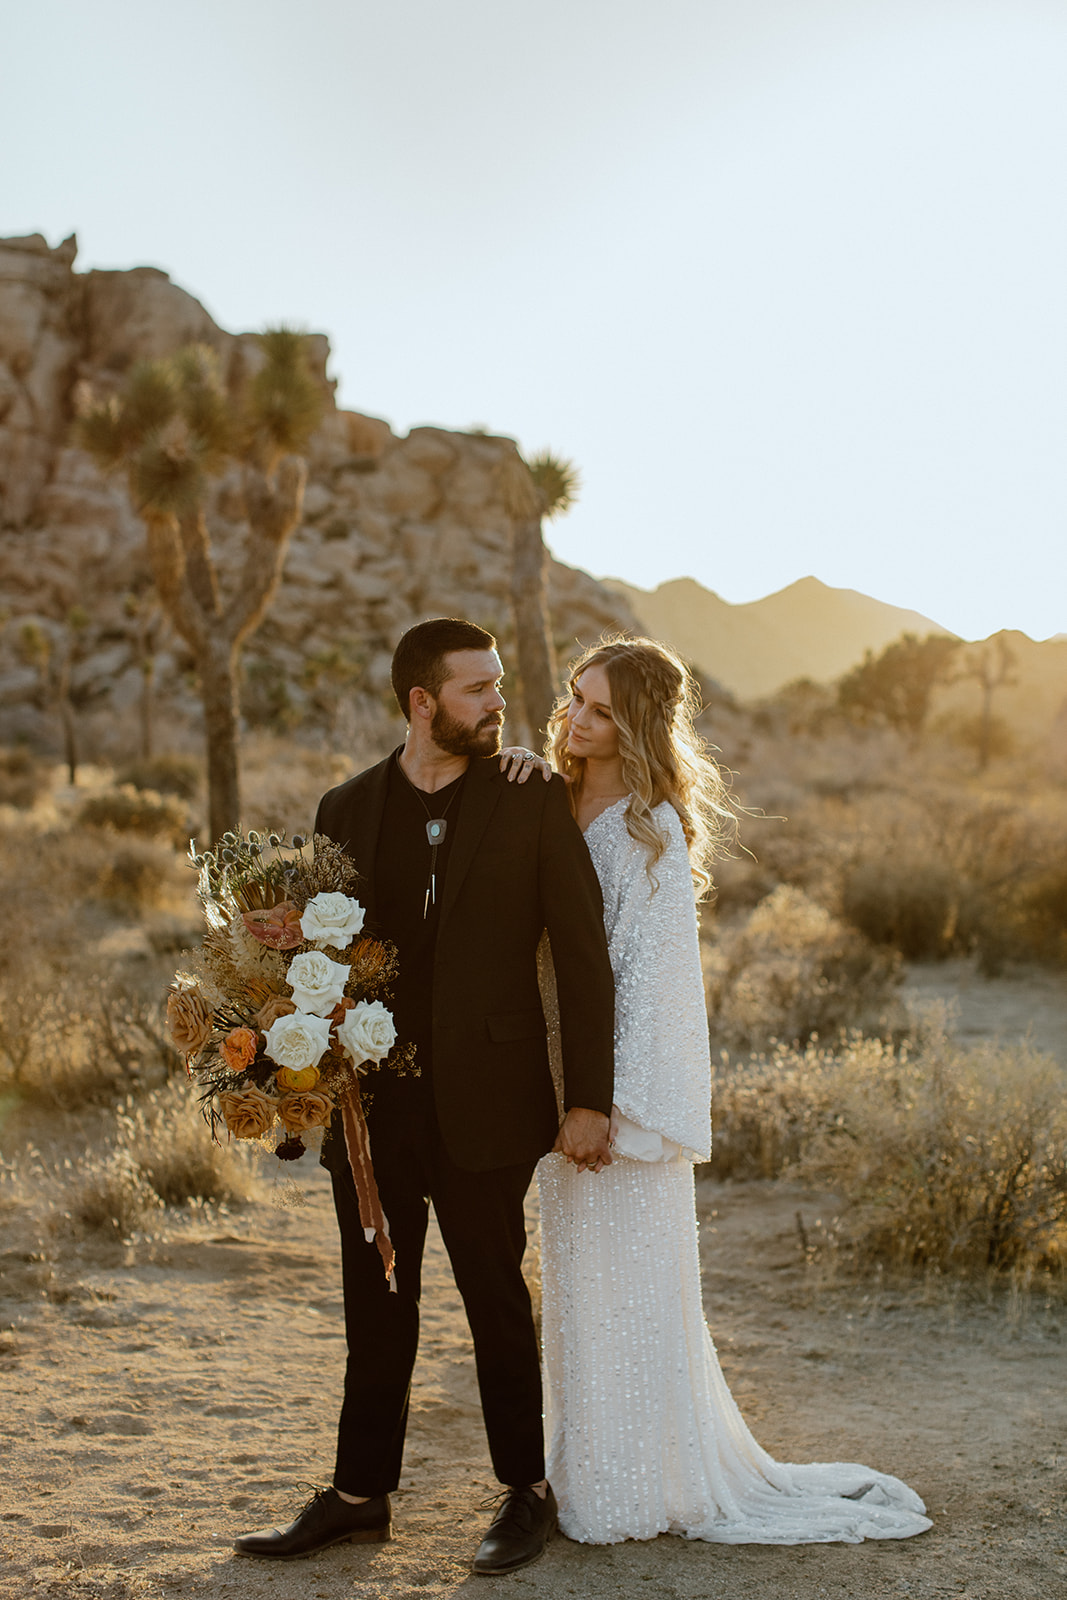 Looking for elopement inspiration? Joshua Tree National Park is the perfect destination for a bohemian desert themed elopement by Emily Battles